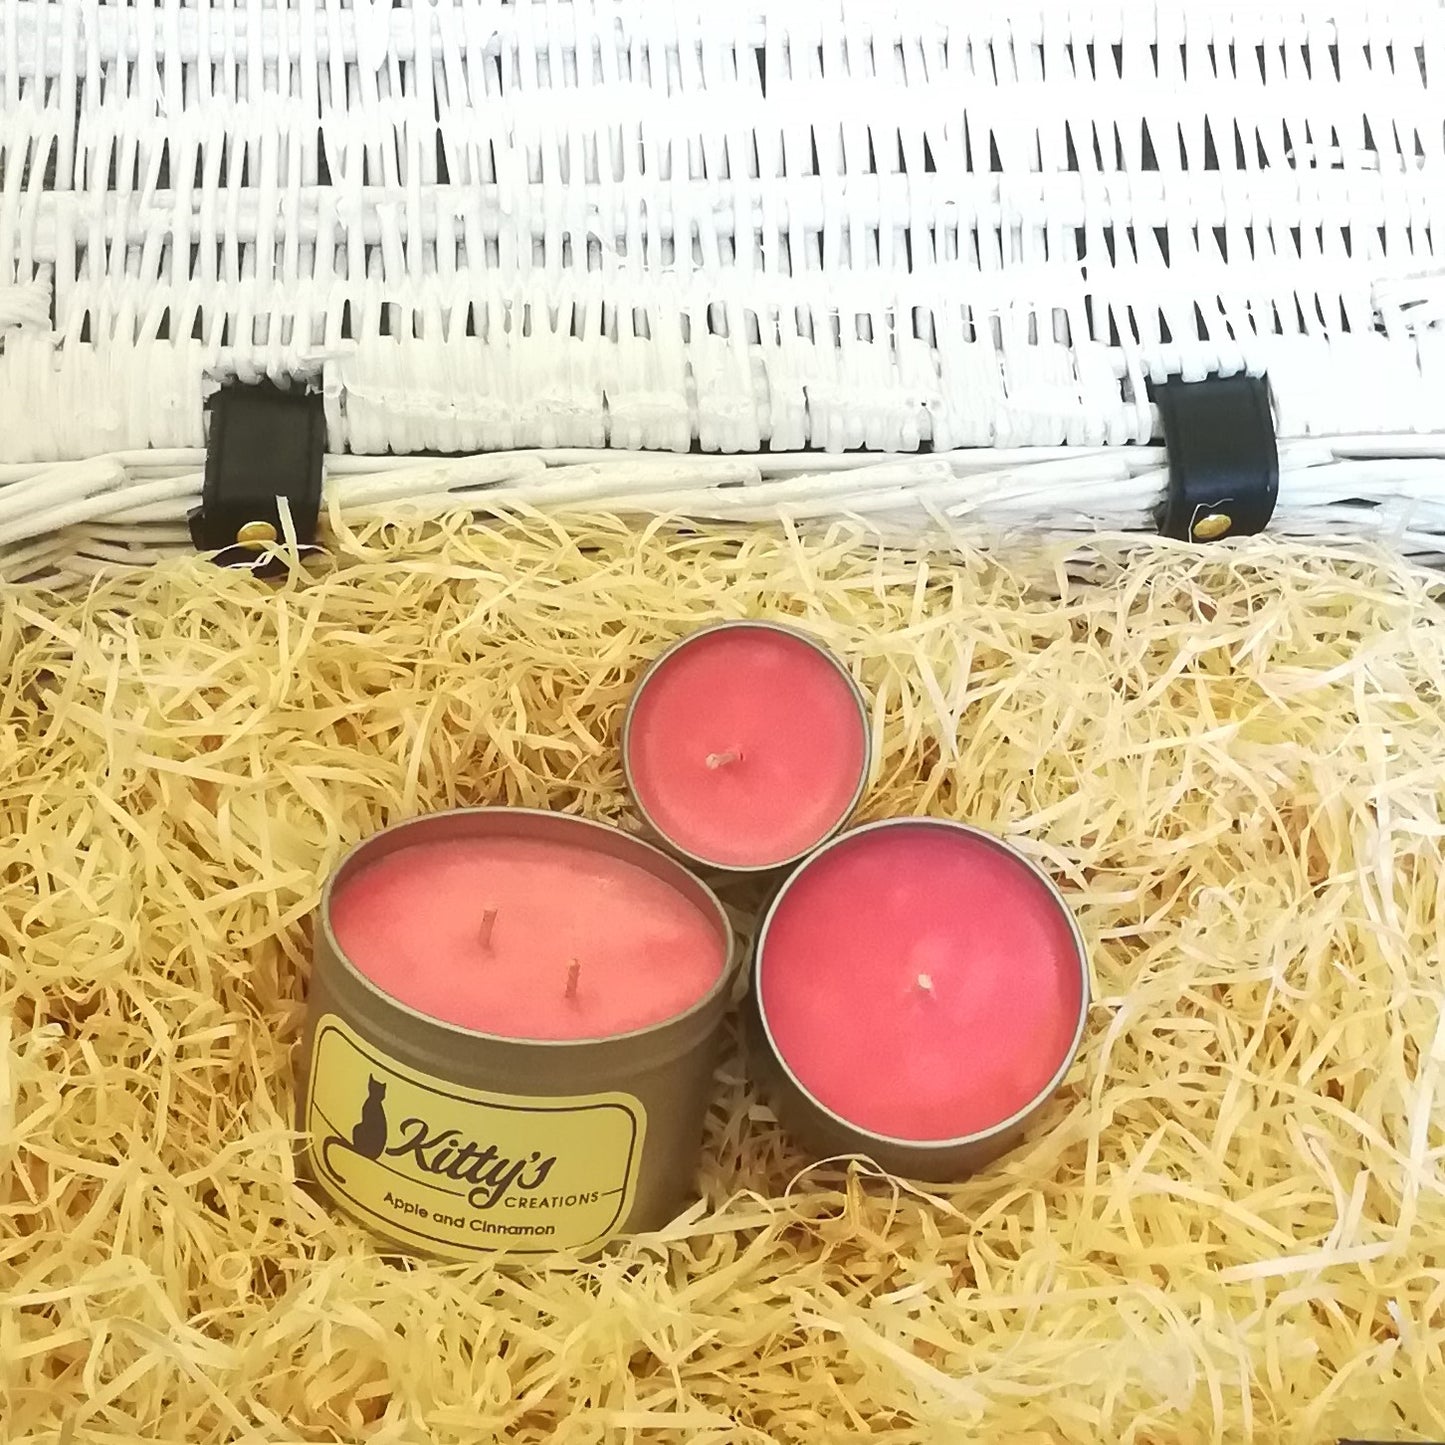 Three hand poured candles filled with apple and cinnamon fragranced soy wax, contained in travel tins with clear see through lids ready for you to take on your next adventure whether for work or pleasure. 